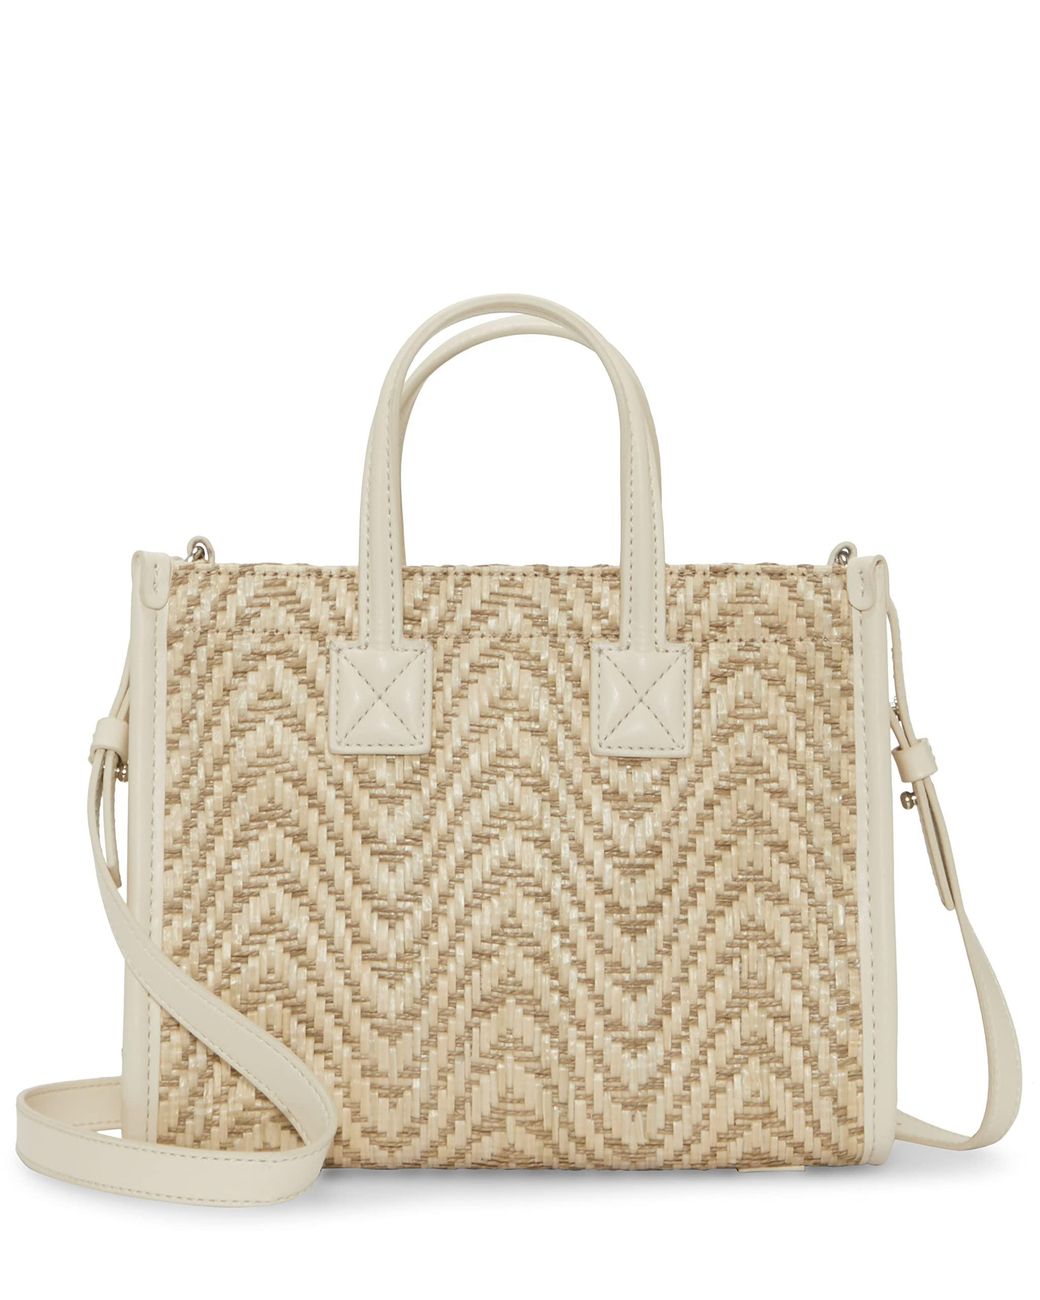 Vince Camuto Saly Small Tote in Natural | Lyst